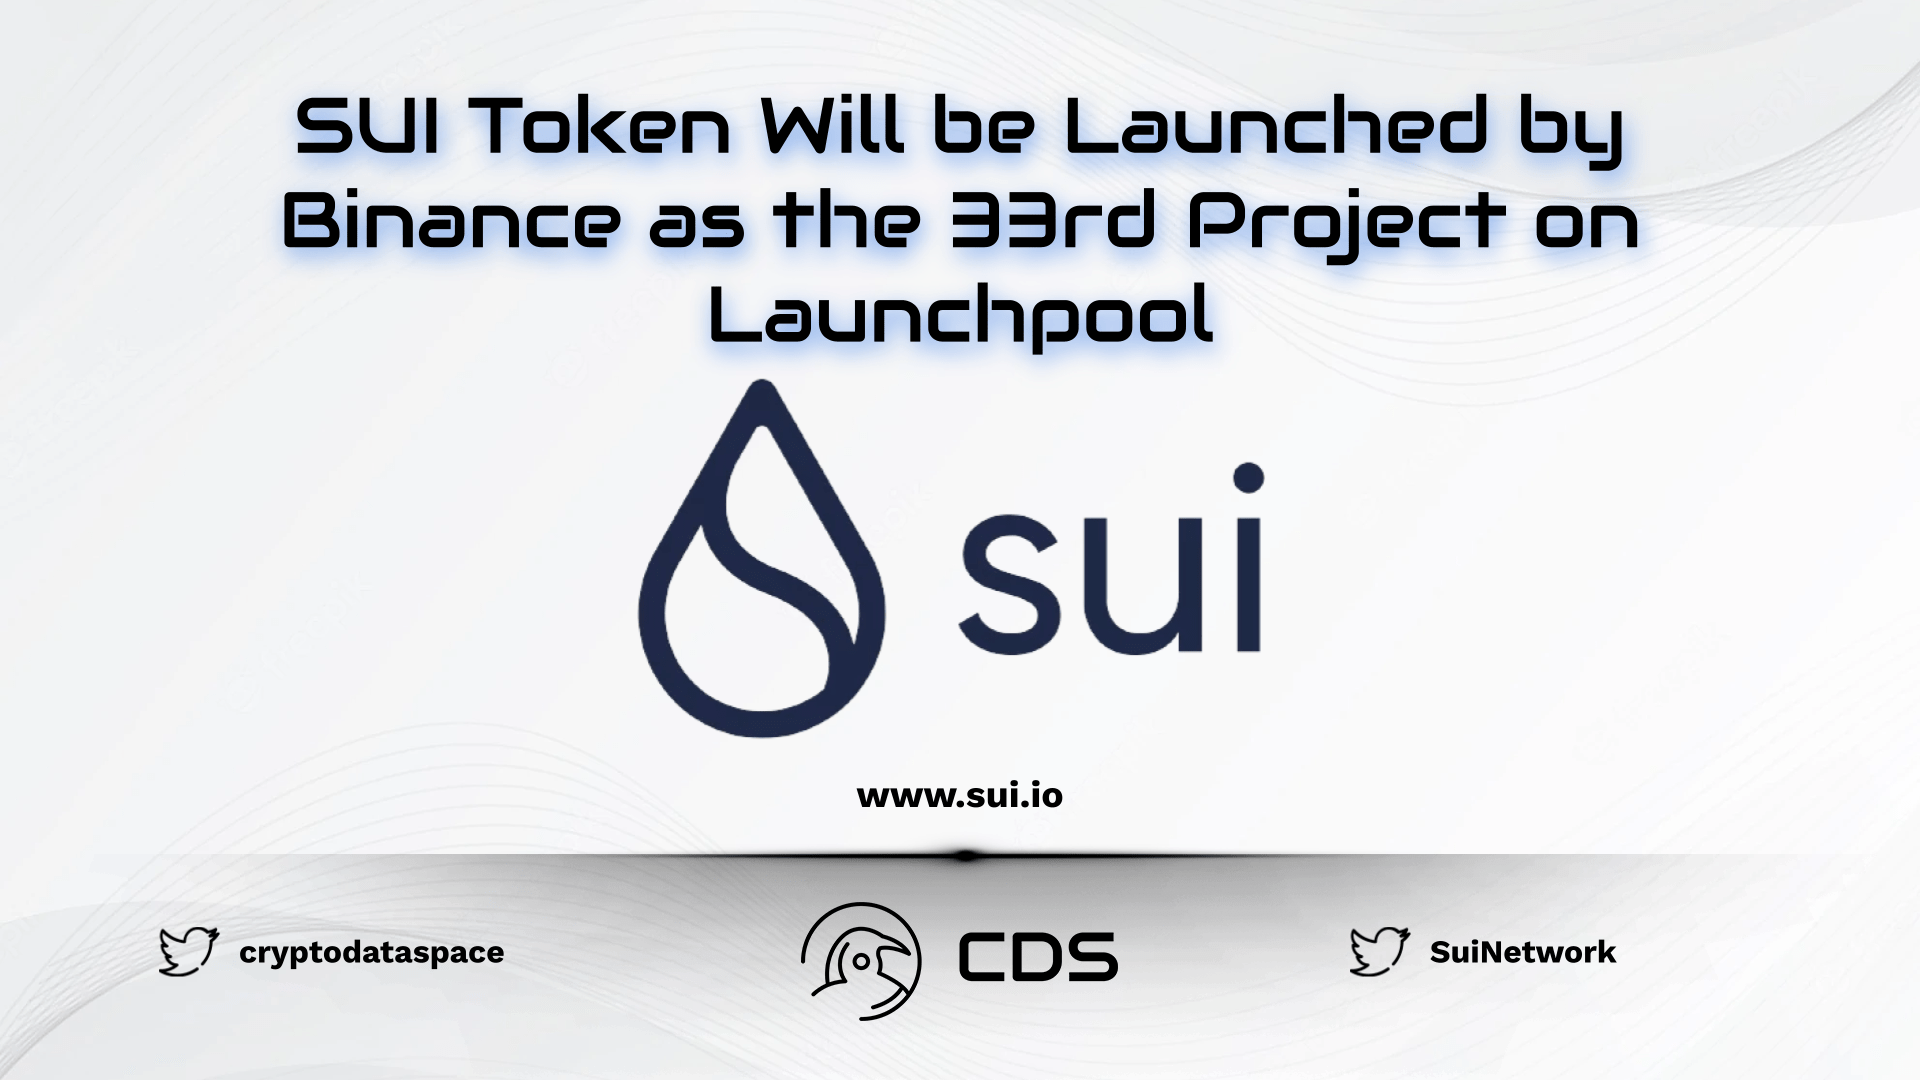 SUI Token Will be Launched by Binance as the 33rd Project on Launchpool